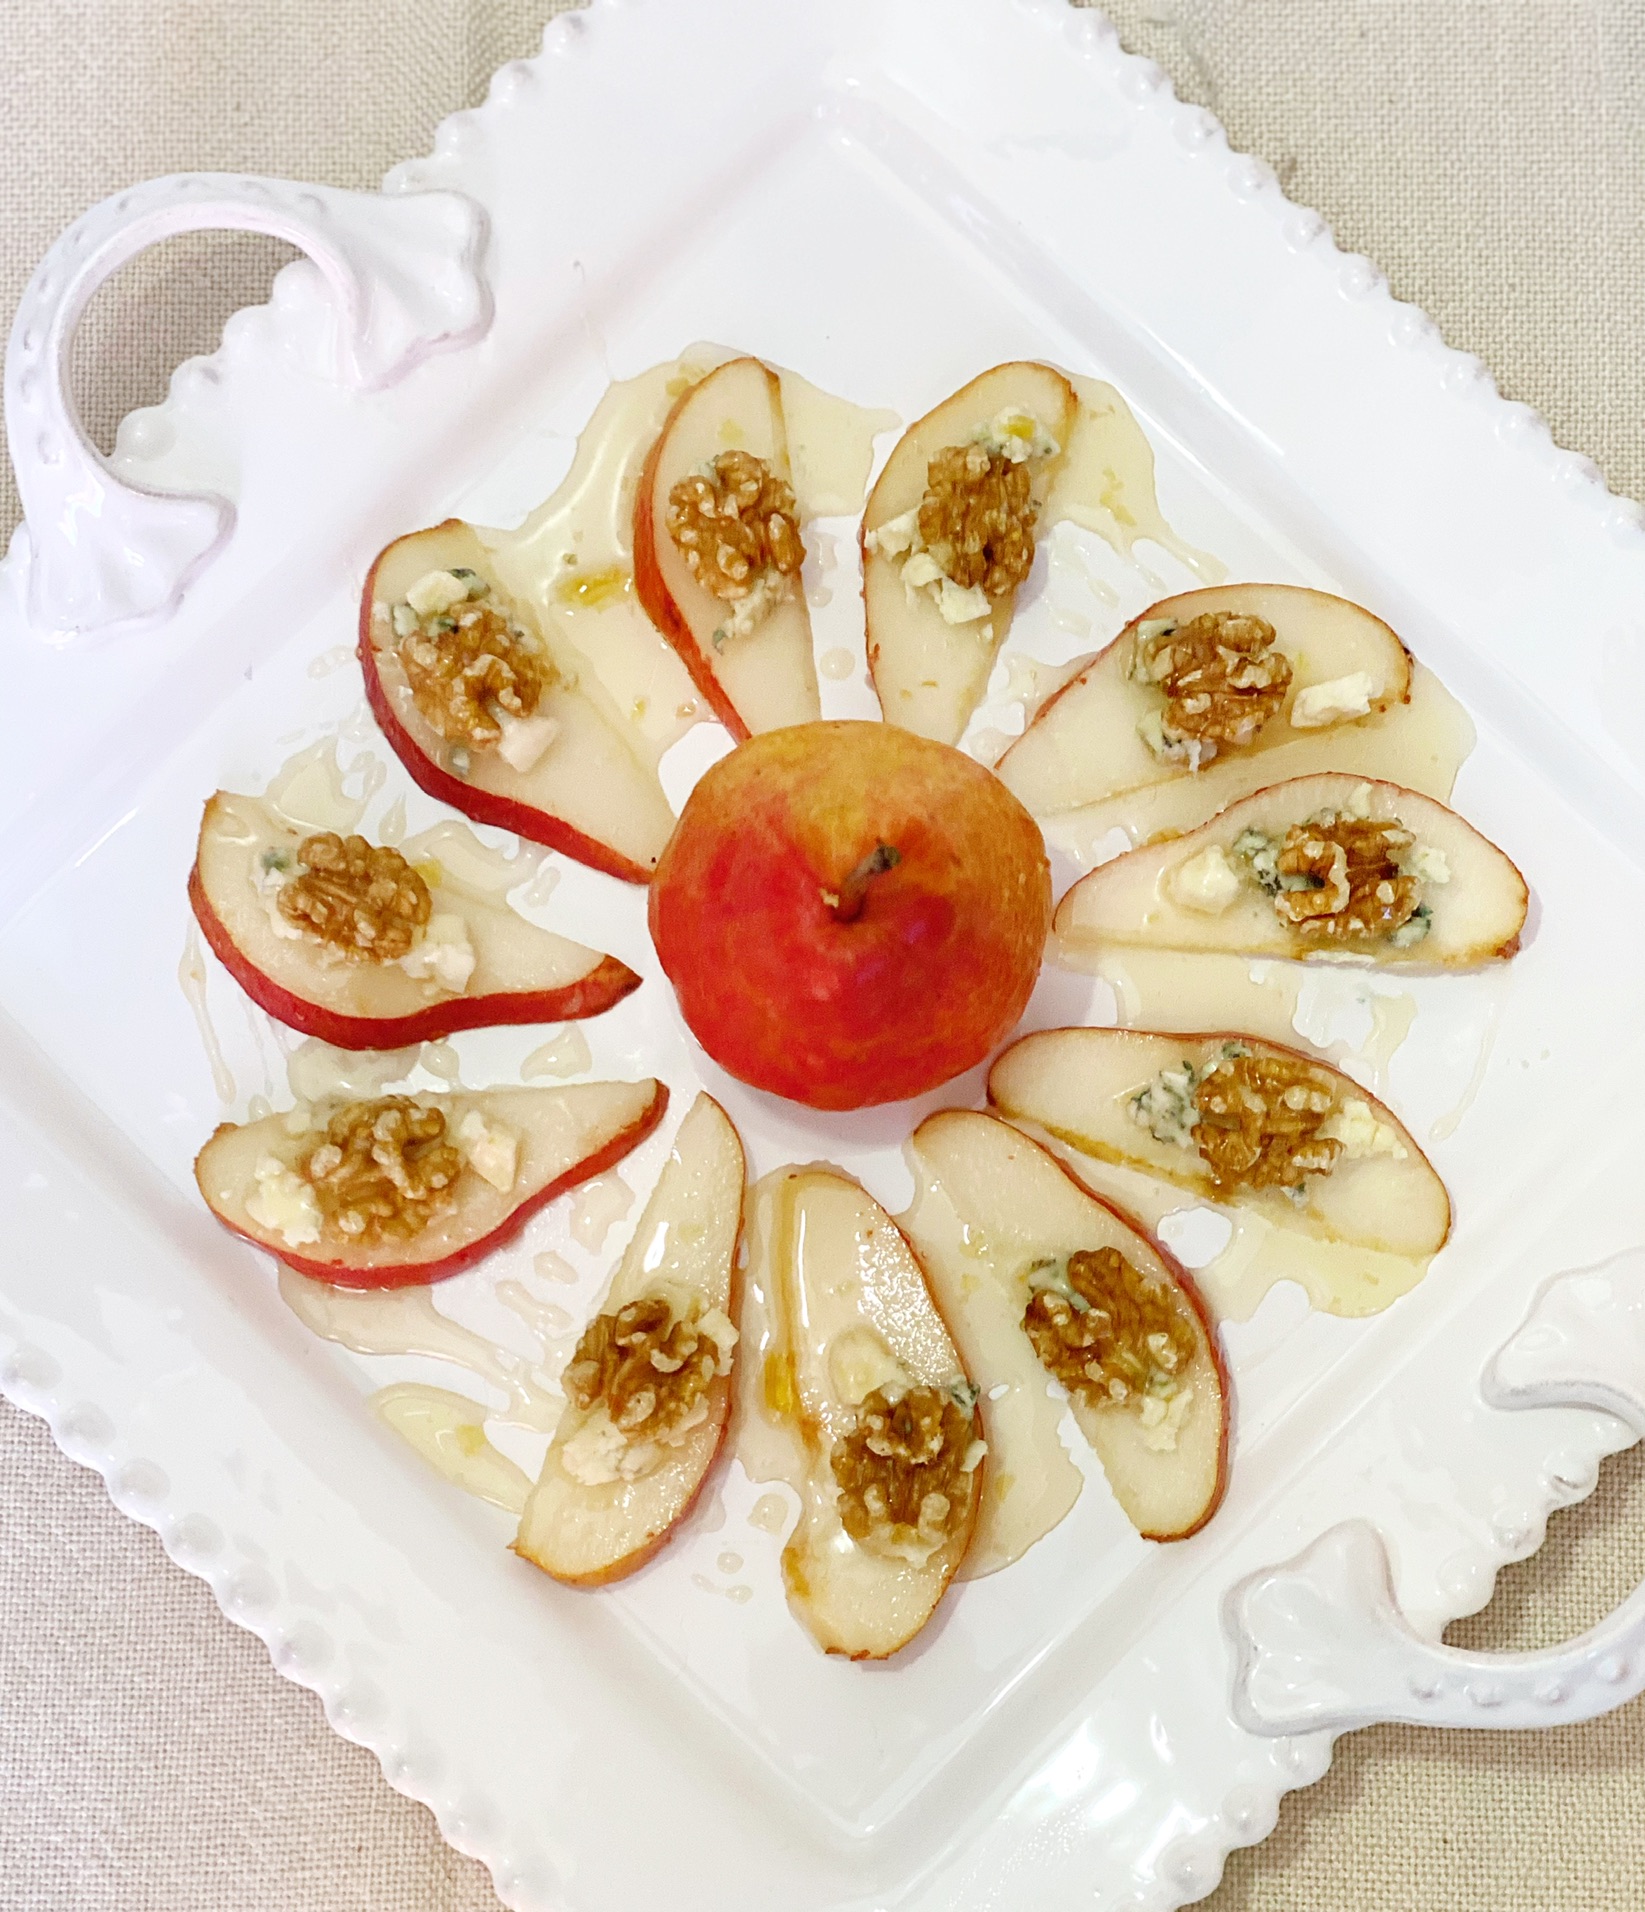 Easy and Elegant! A Pear Appetizer With A Honey Drizzle